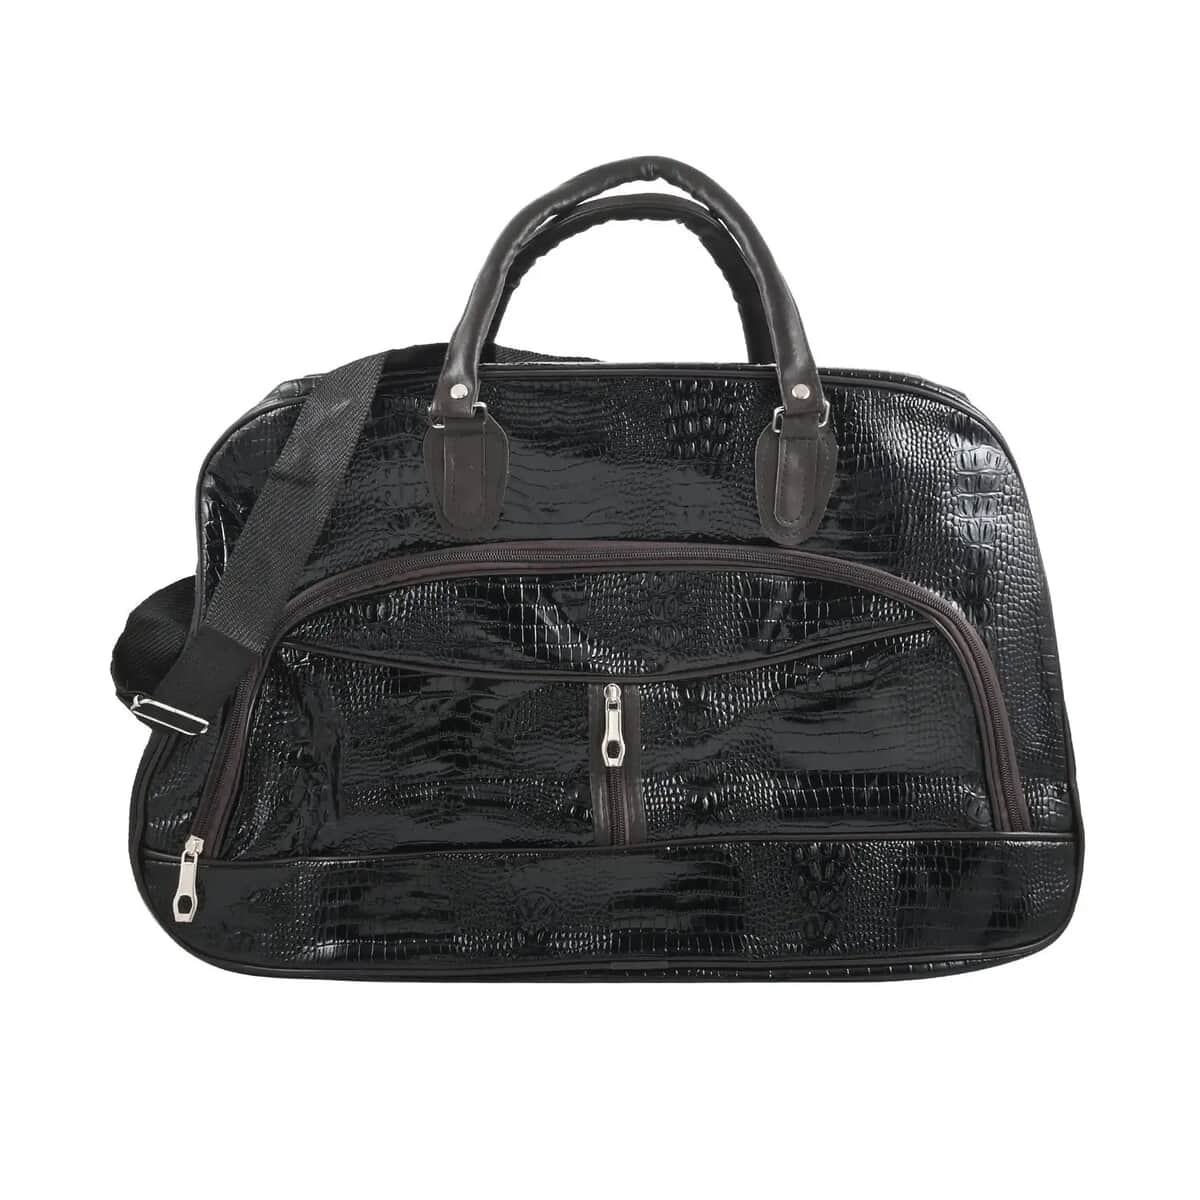 Black Crocodile Embossed Pattern Faux Leather Travel Bag with Handle Drop and Shoulder Strap image number 0